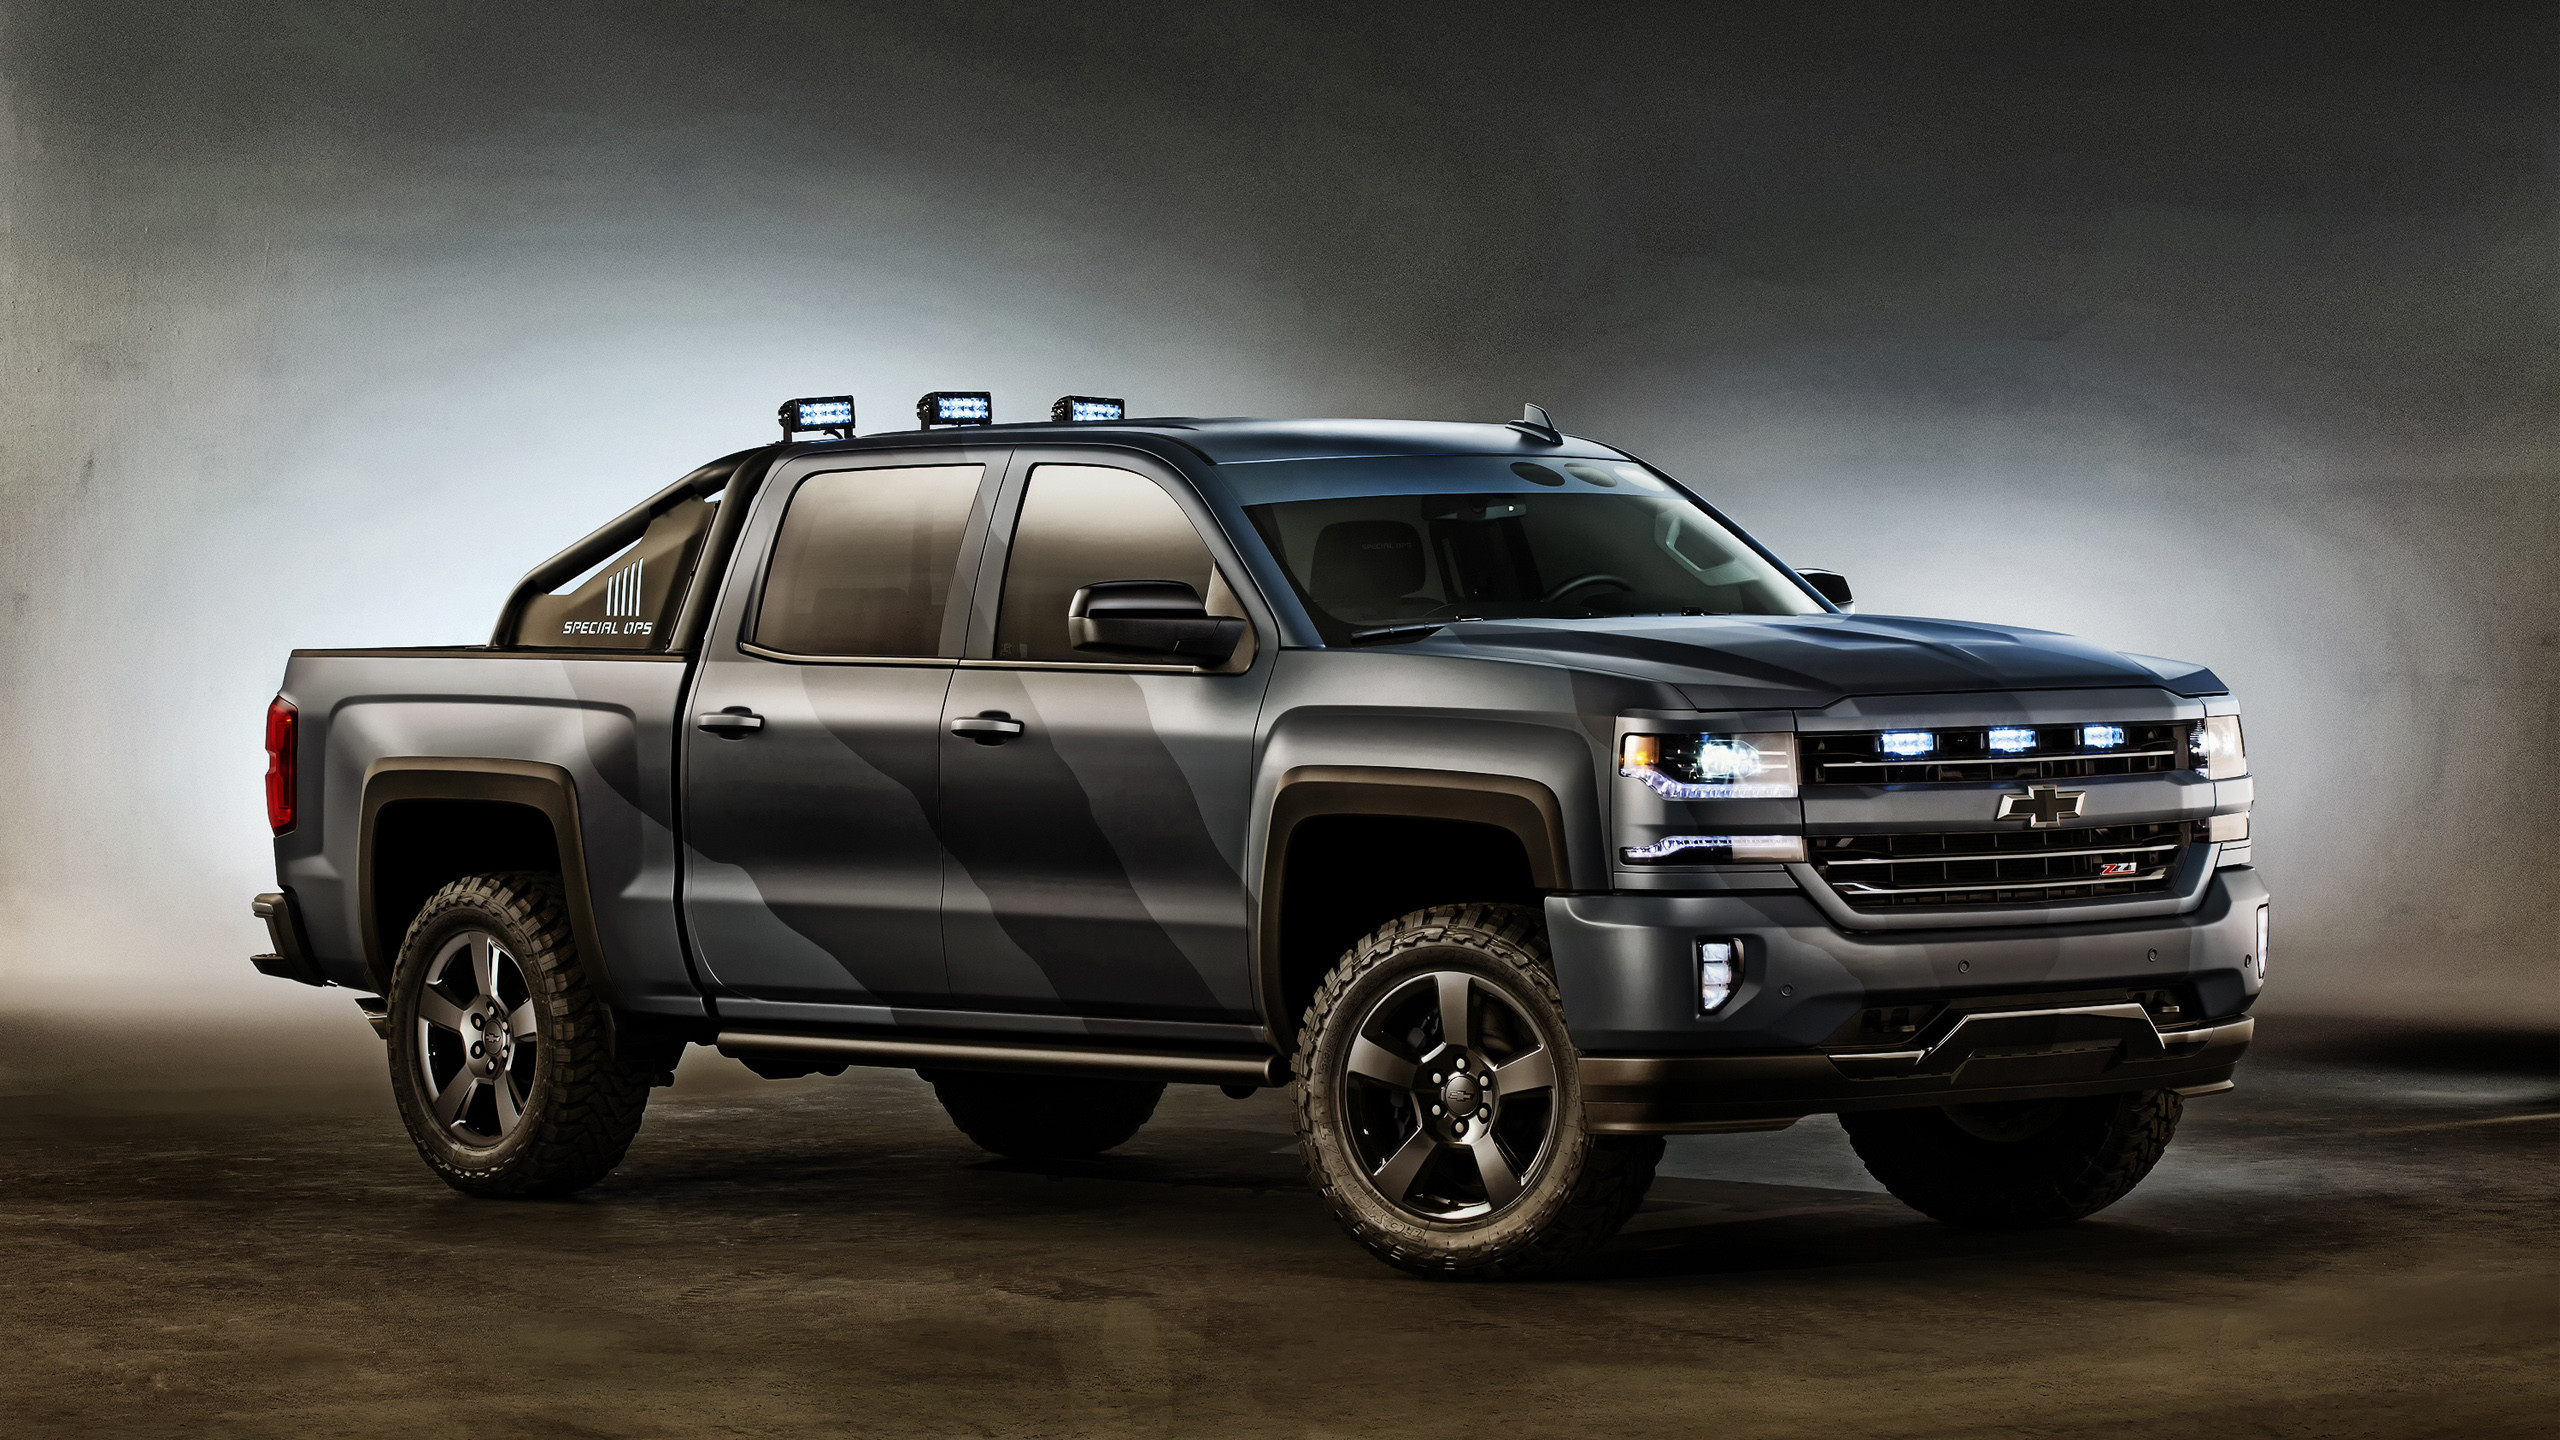 Lifted Chevy Truck Wallpaper Book Source for free download HD, 4K & high quality wallpaper